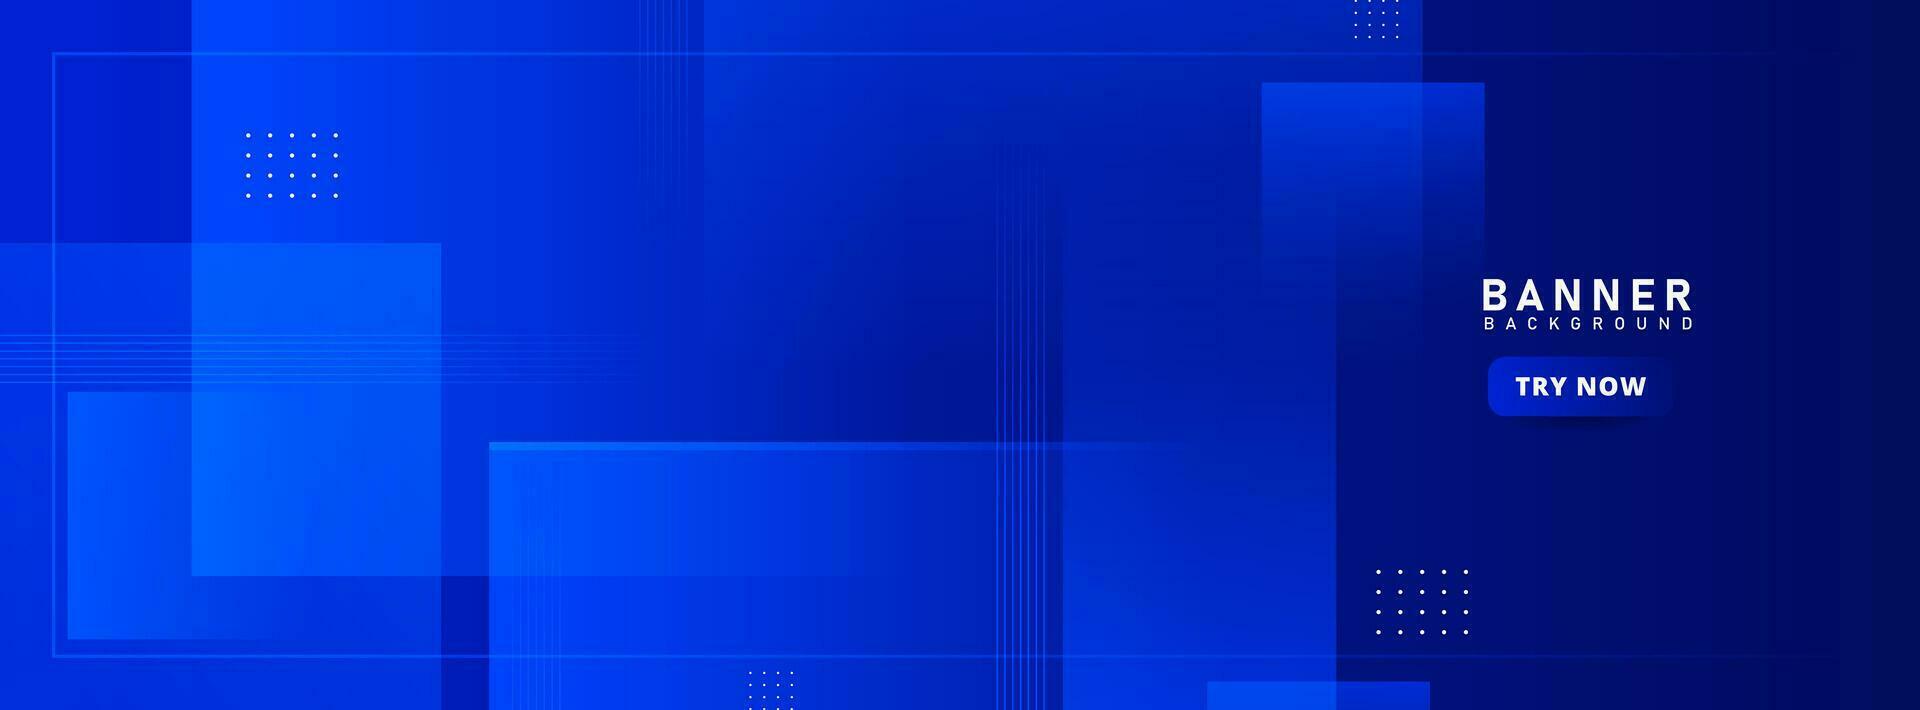 Banner background. Blue gradation. Pattern. Abstract vector